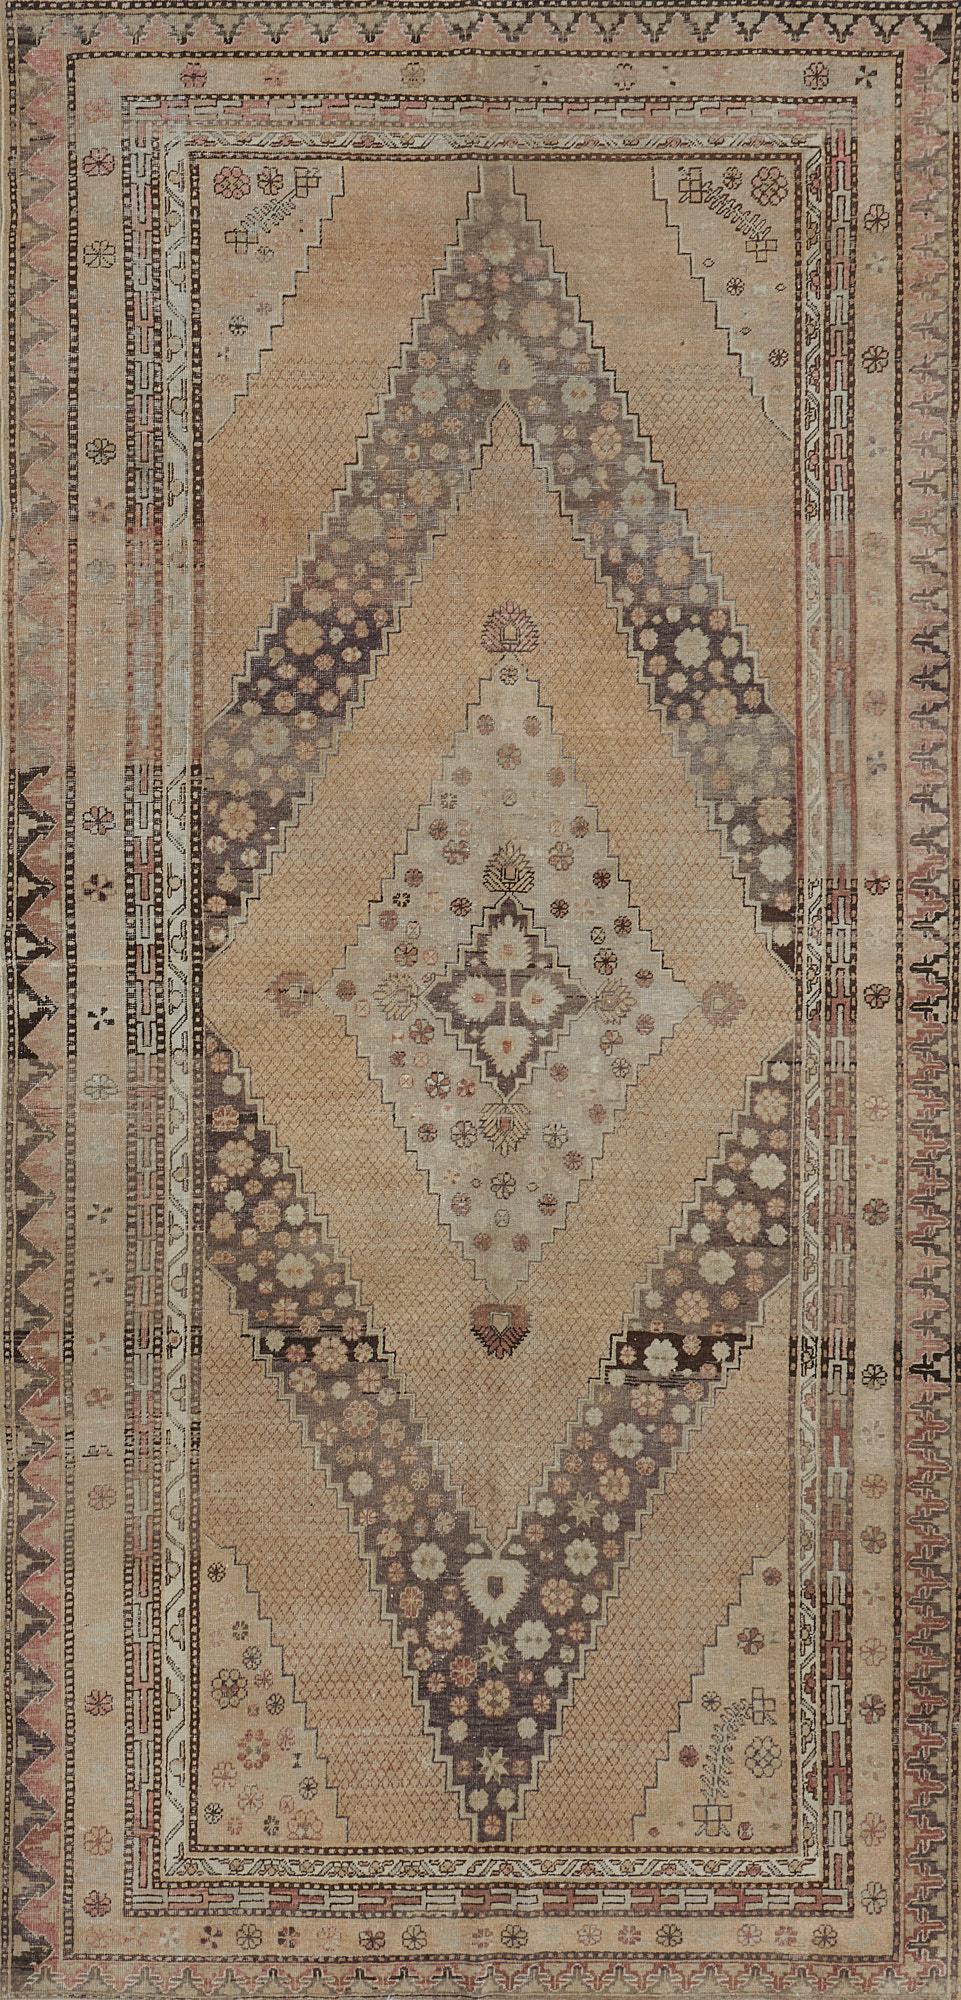 This antique, circa 1900, Khotan rug has a buff-brown field with a delicate fox-brown lozenge lattice around a ivory stepped medallion with palmettes at each side and end containing scattered flowerheads around a mole-brown stepped lozenge medallion